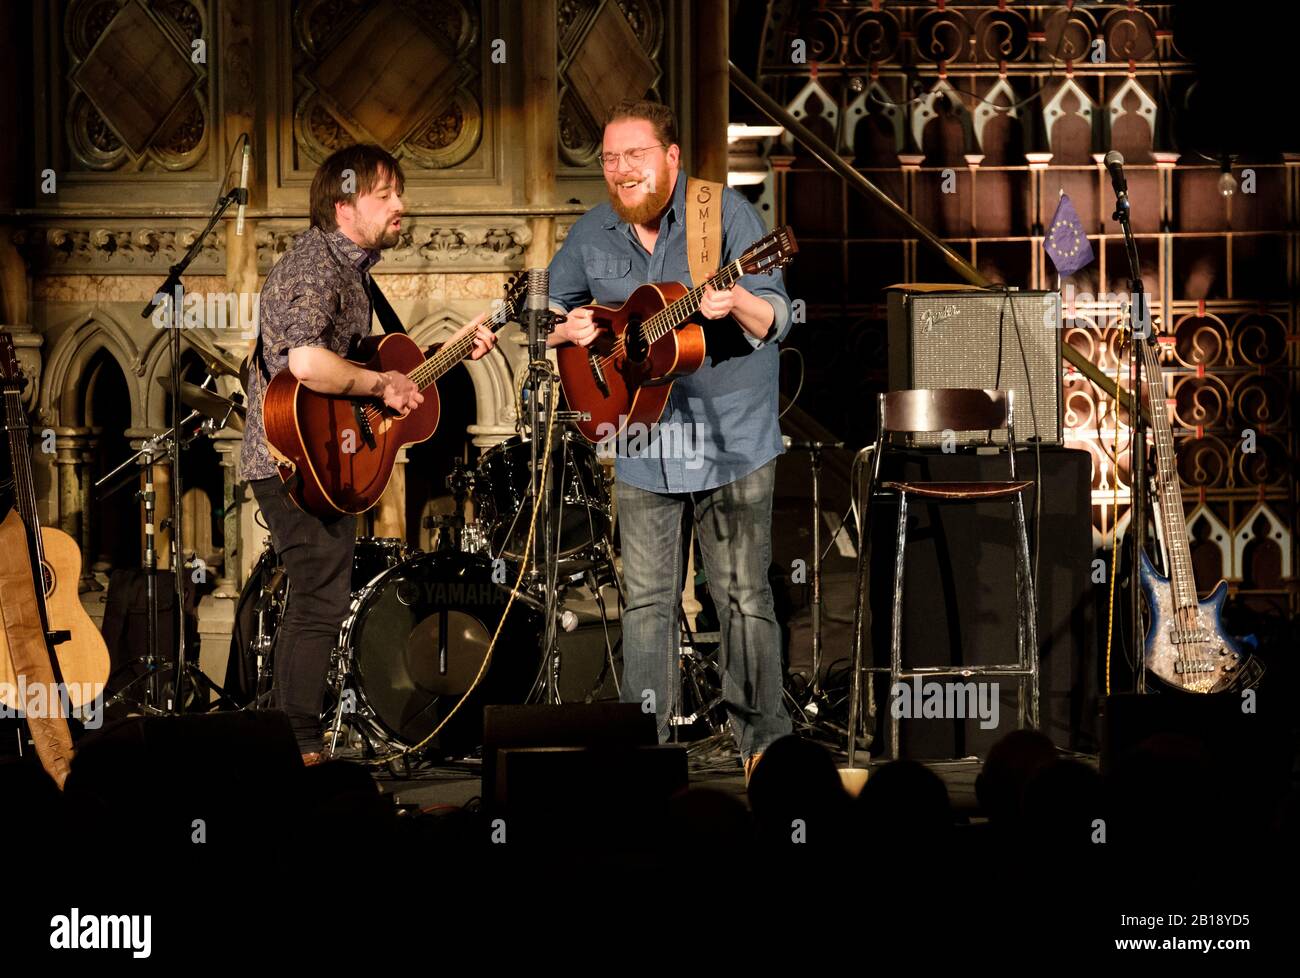 Jimmy Brewer and Ben Smith of Smith and Brewer performing at the Union Chapel, London. Feb 21, 2020 Stock Photo